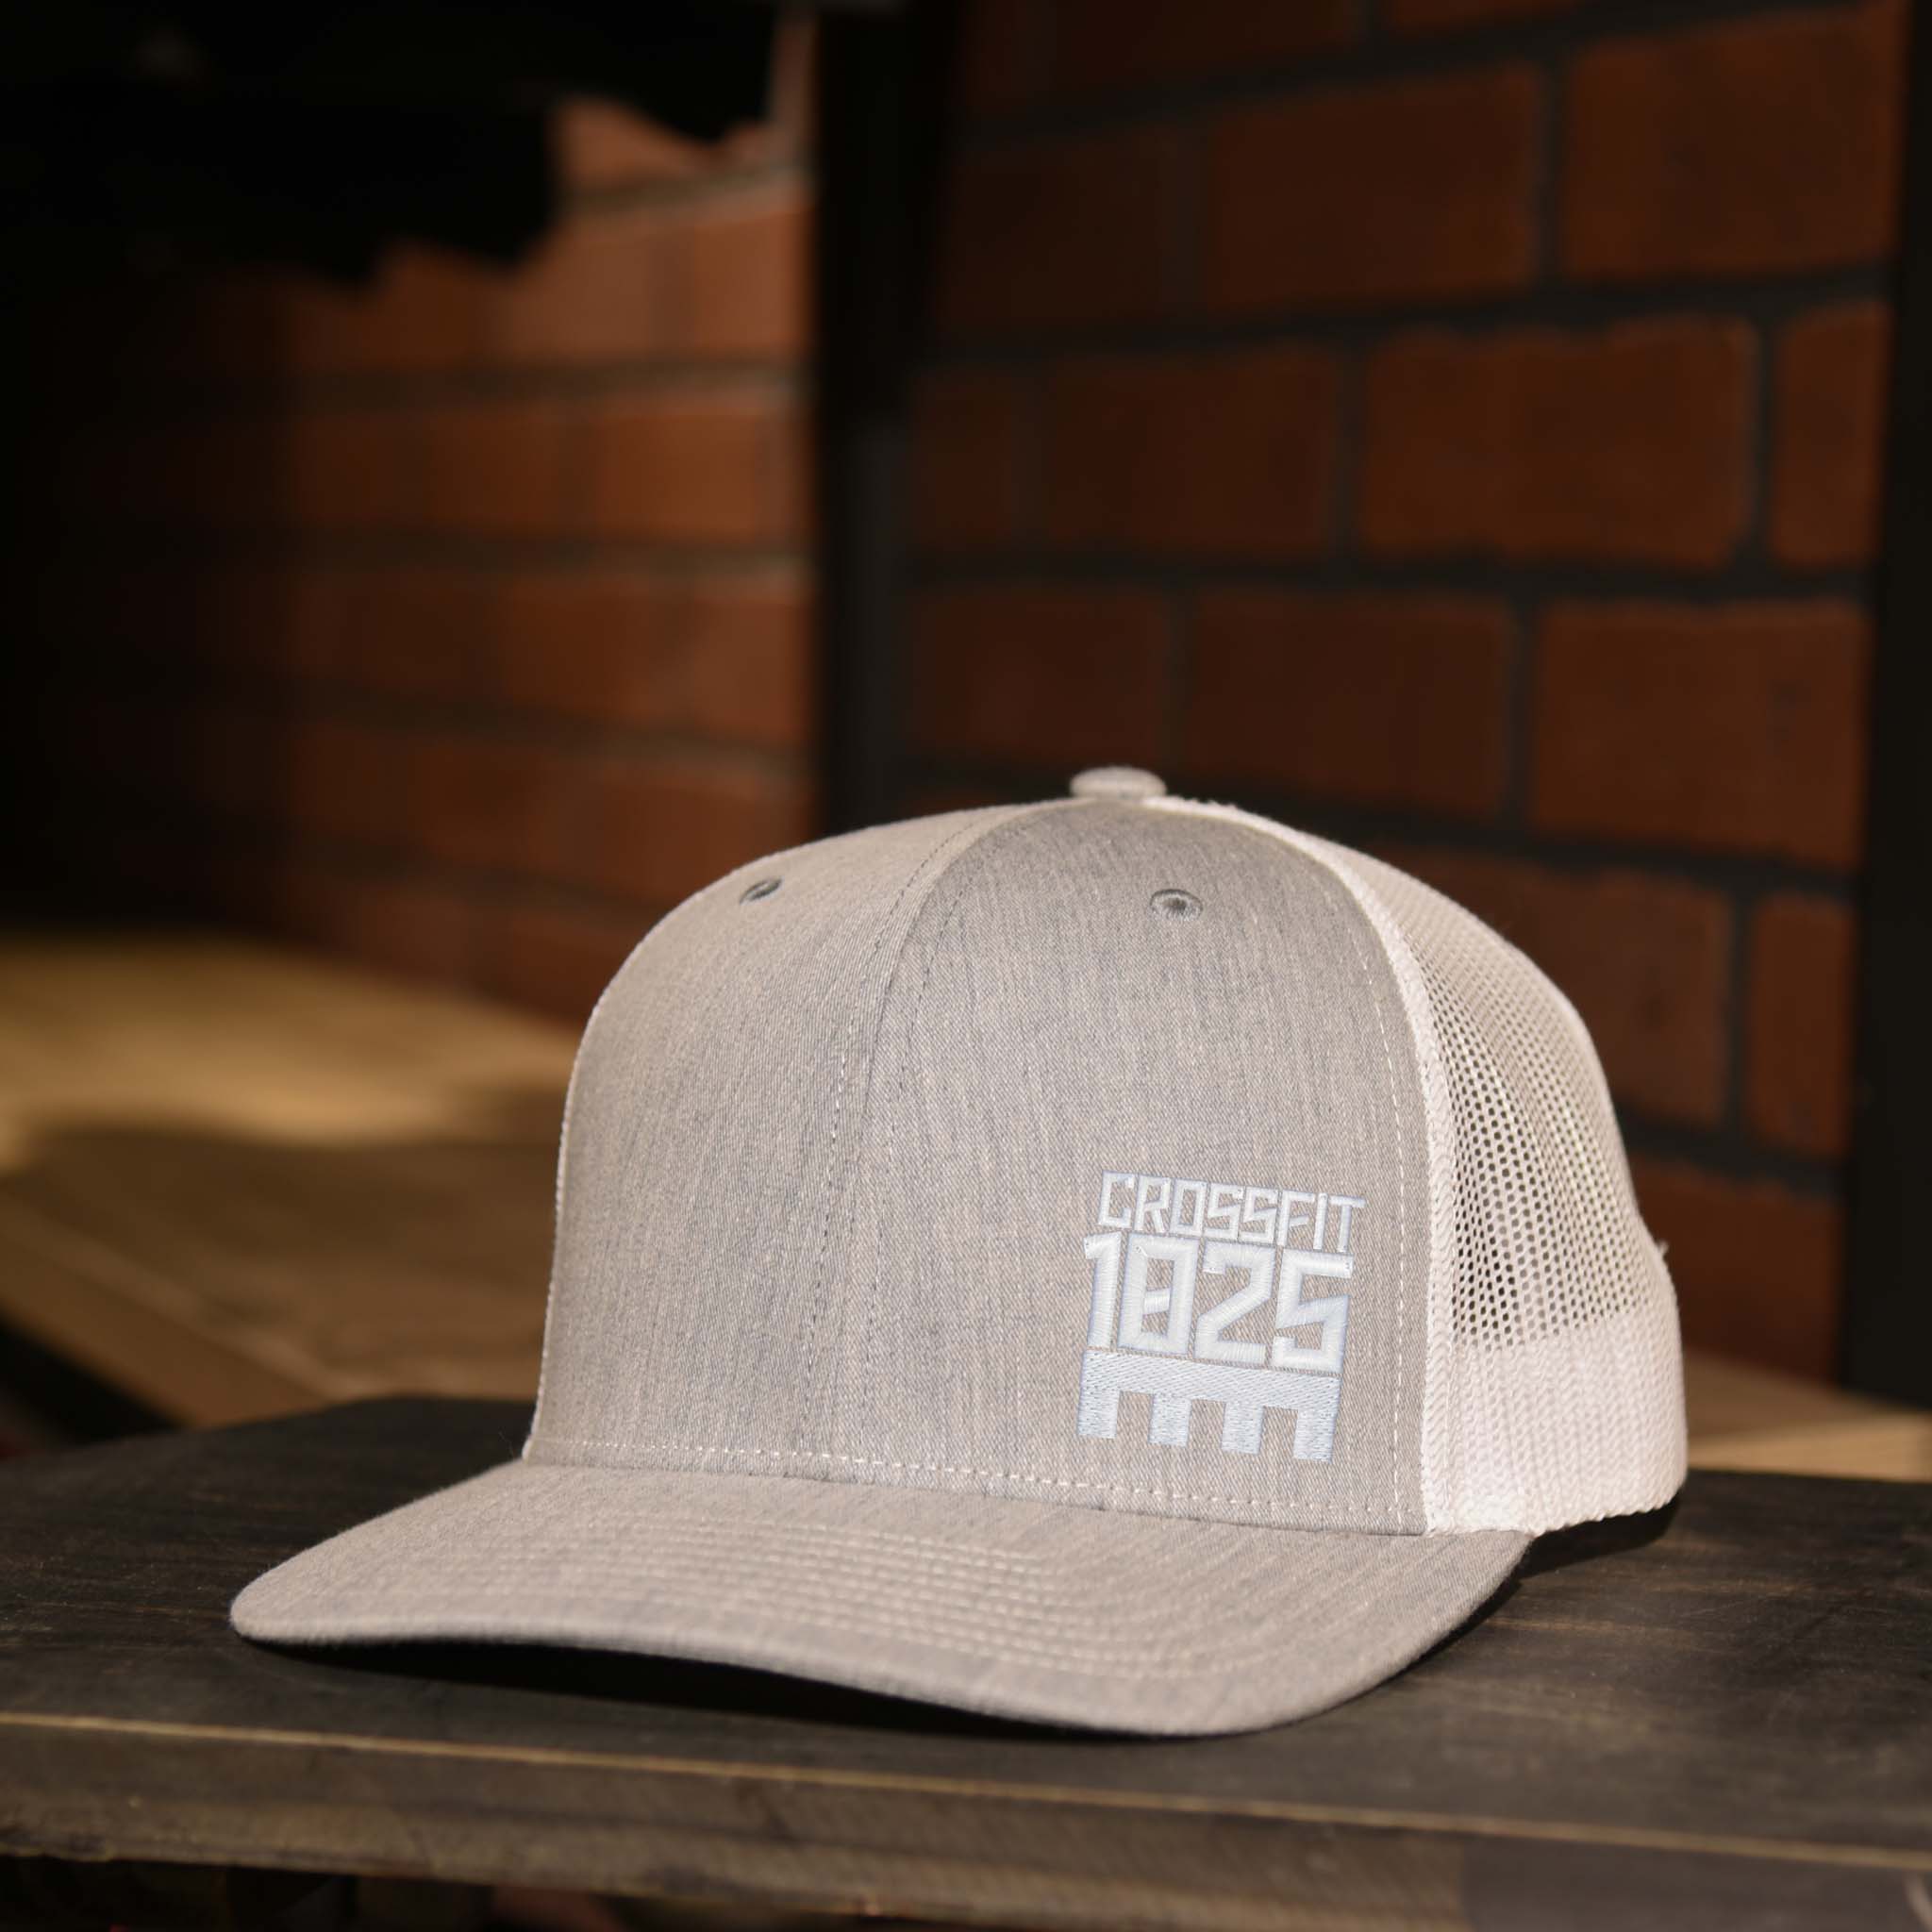 CrossFit 1825 White Embroidered Logo Trucker Hat in Heather Gray and White